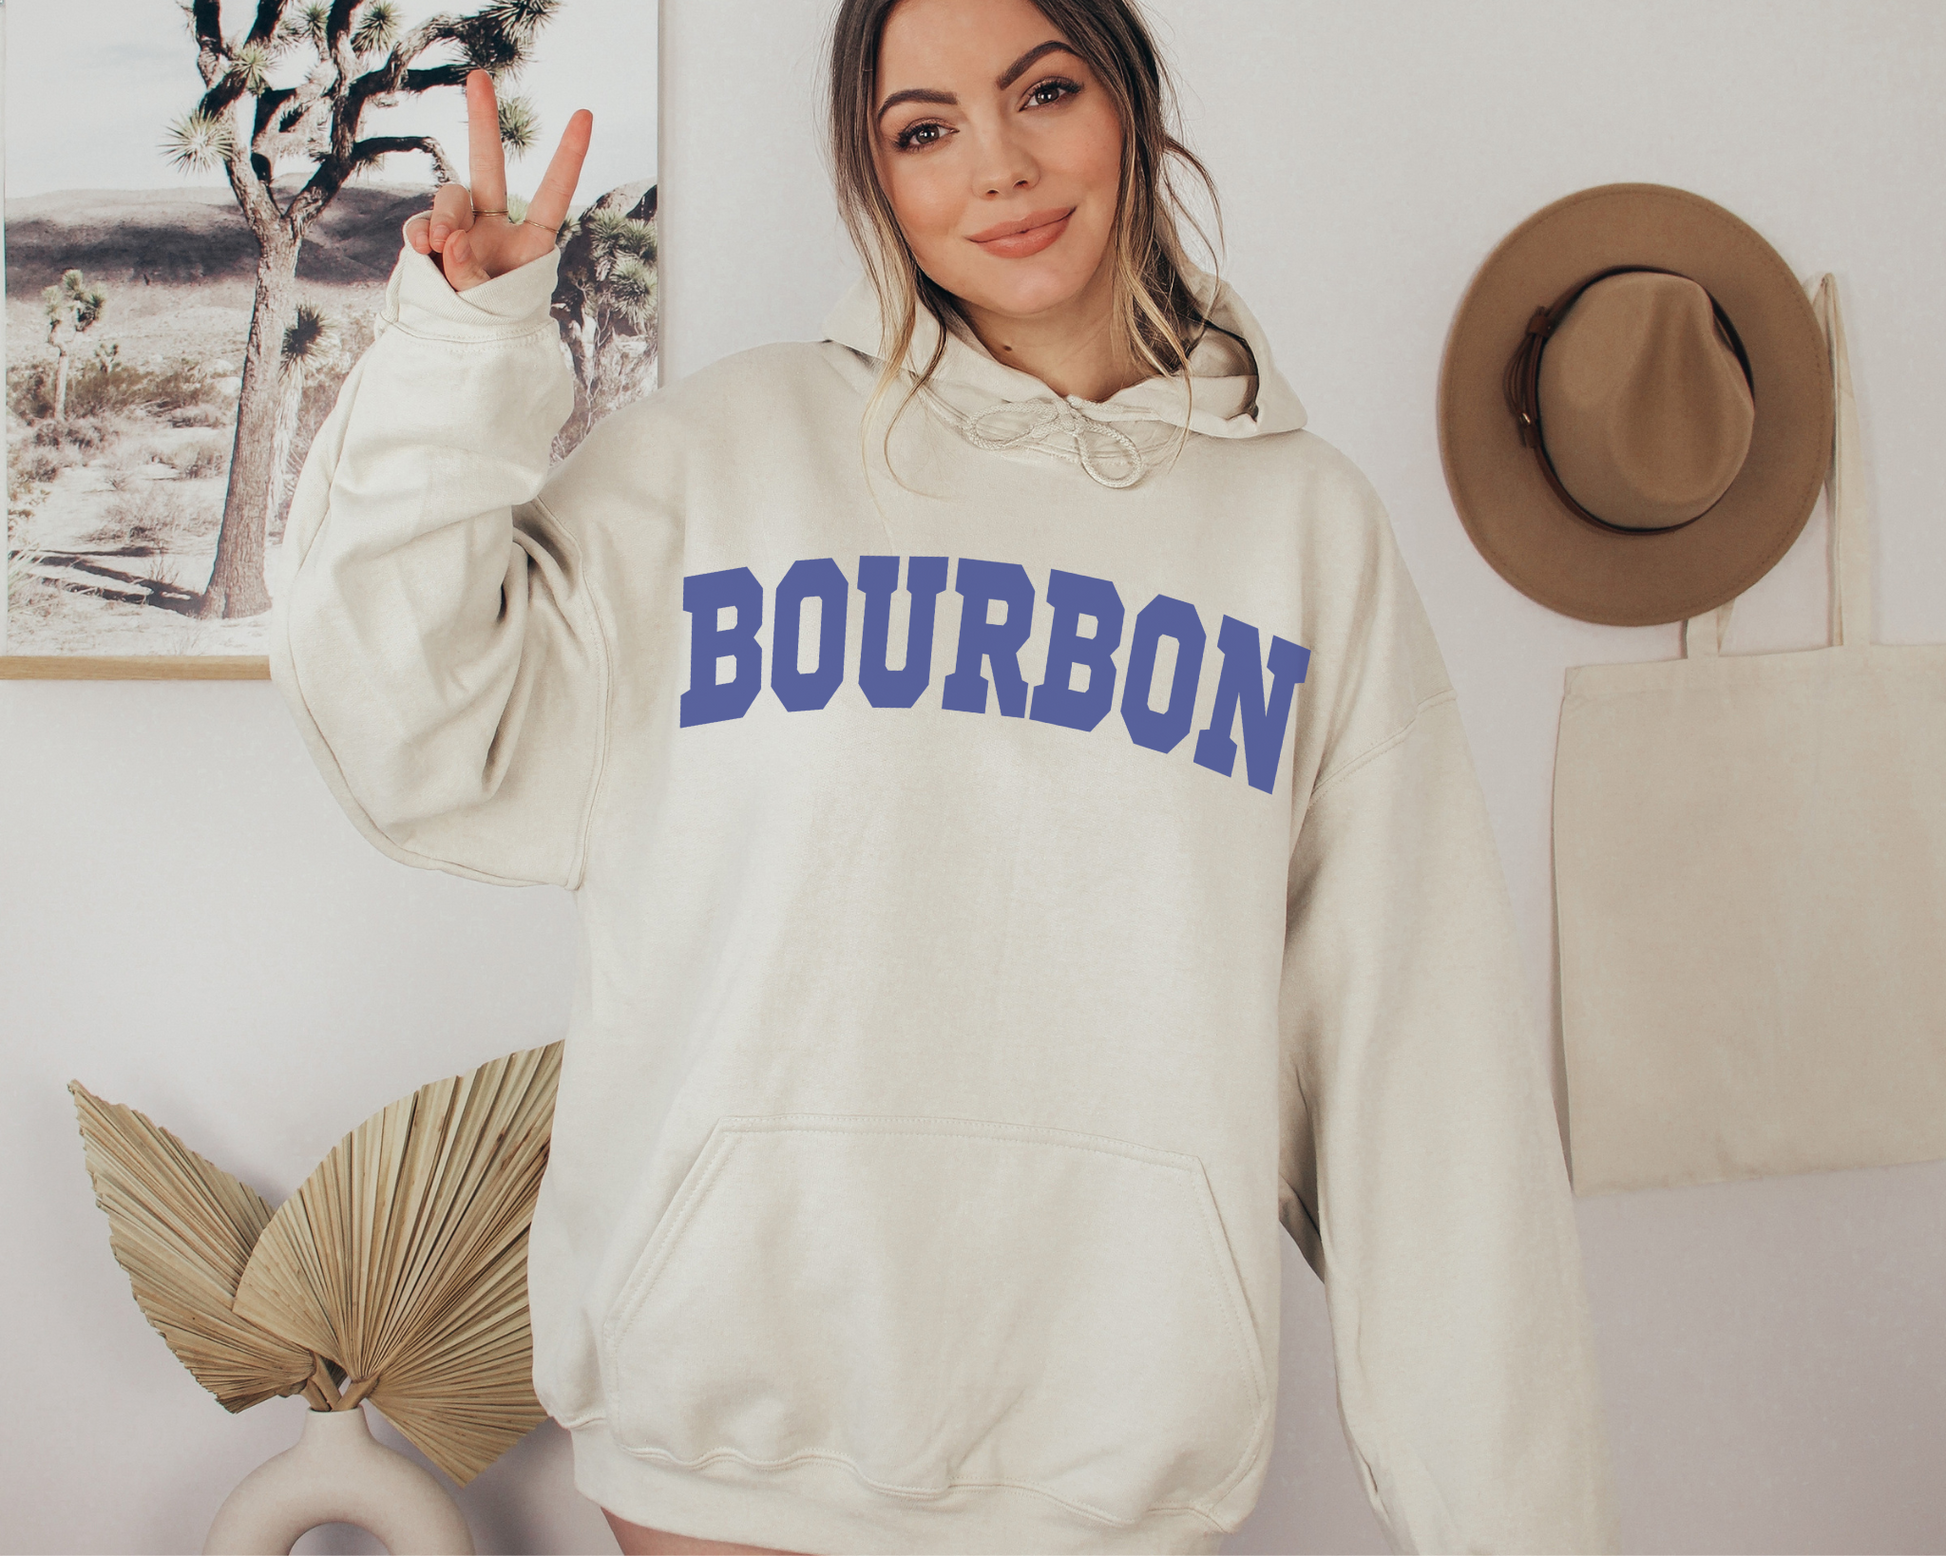 Bourbon Hoodie in Sand on a Female